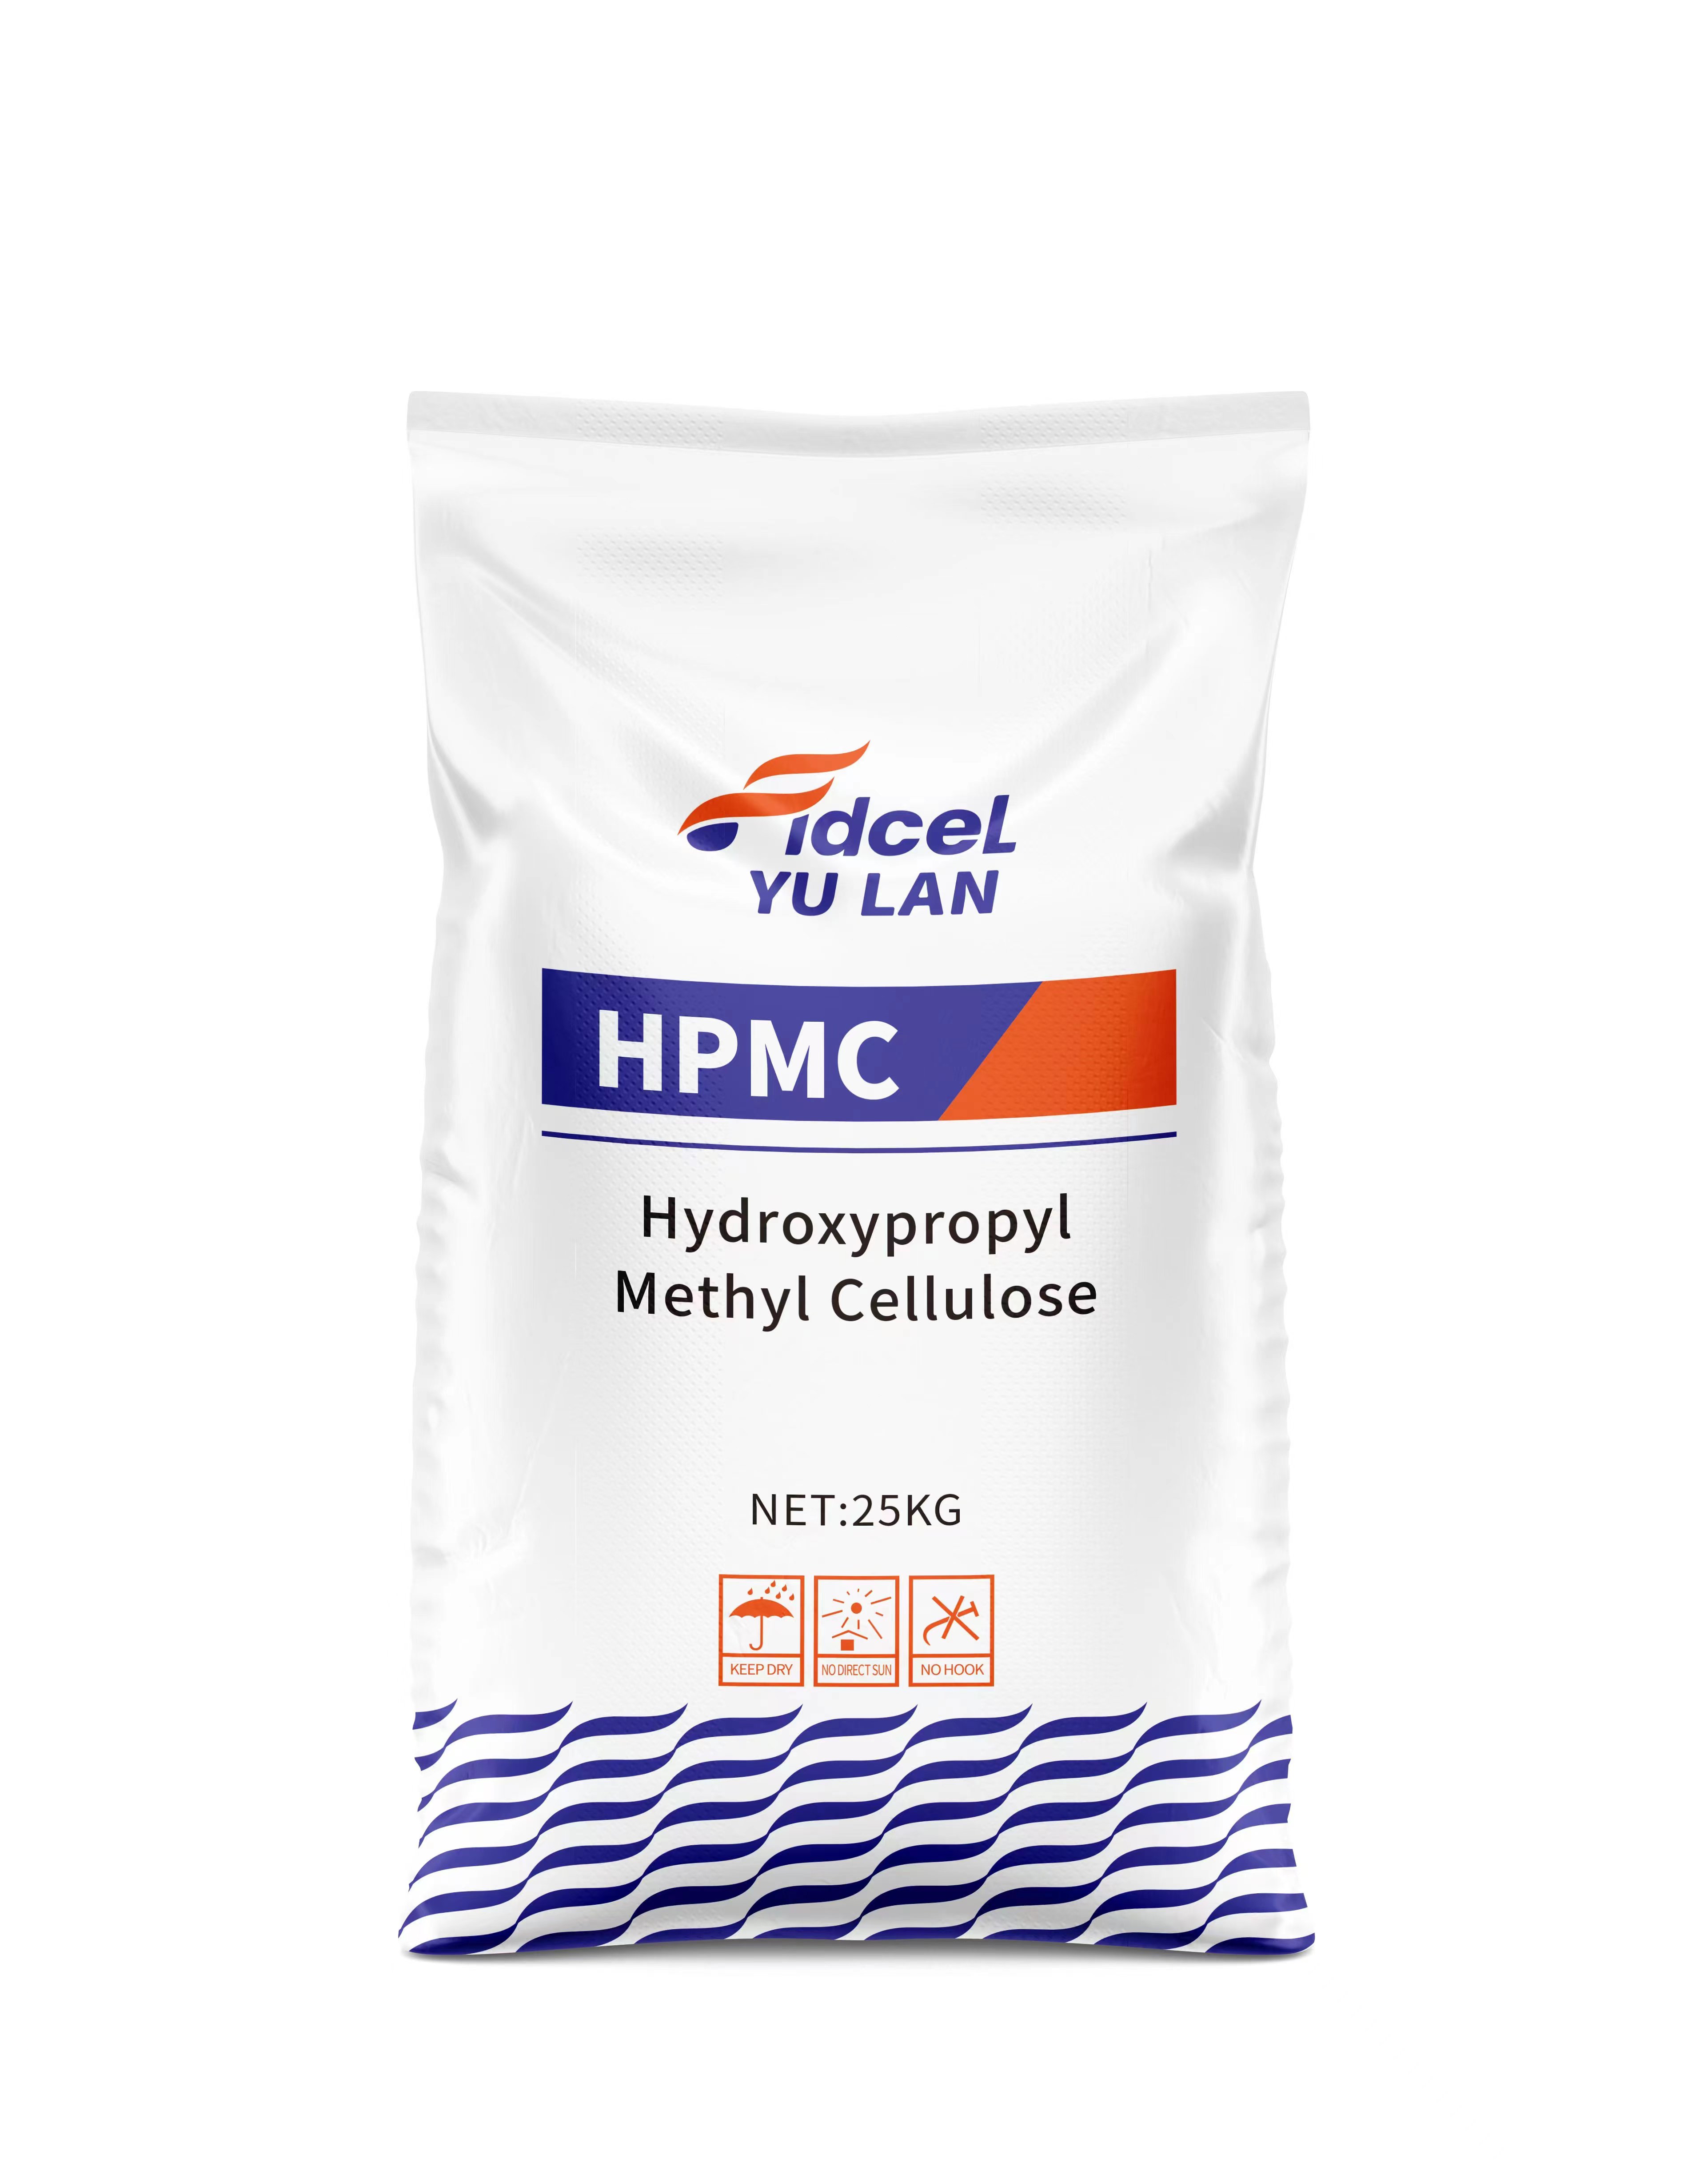 HPMC 100000 cps Viscosity HPMC Internal and External Wall Putty Powder uses Hydroxy Propyl Methyl Cellulose